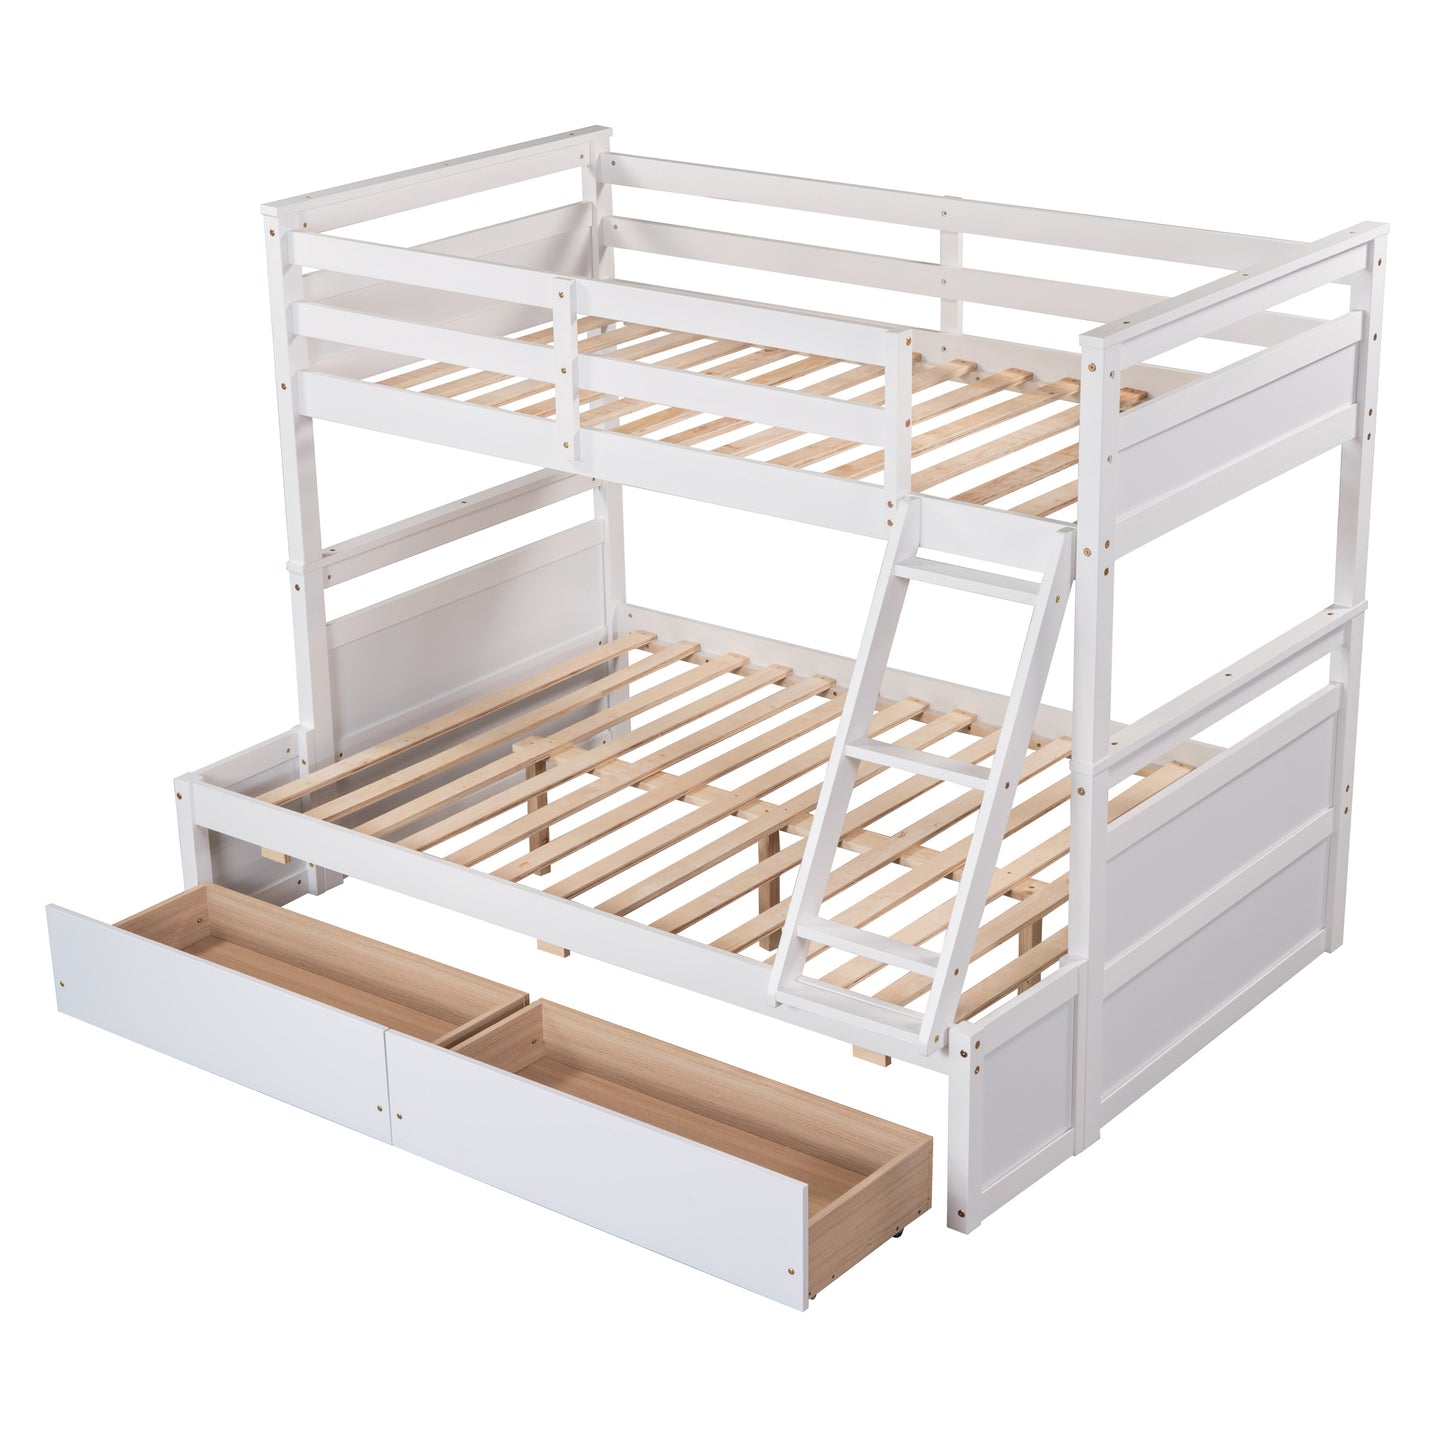 Twin over Full Bunk Bed with Storage - White